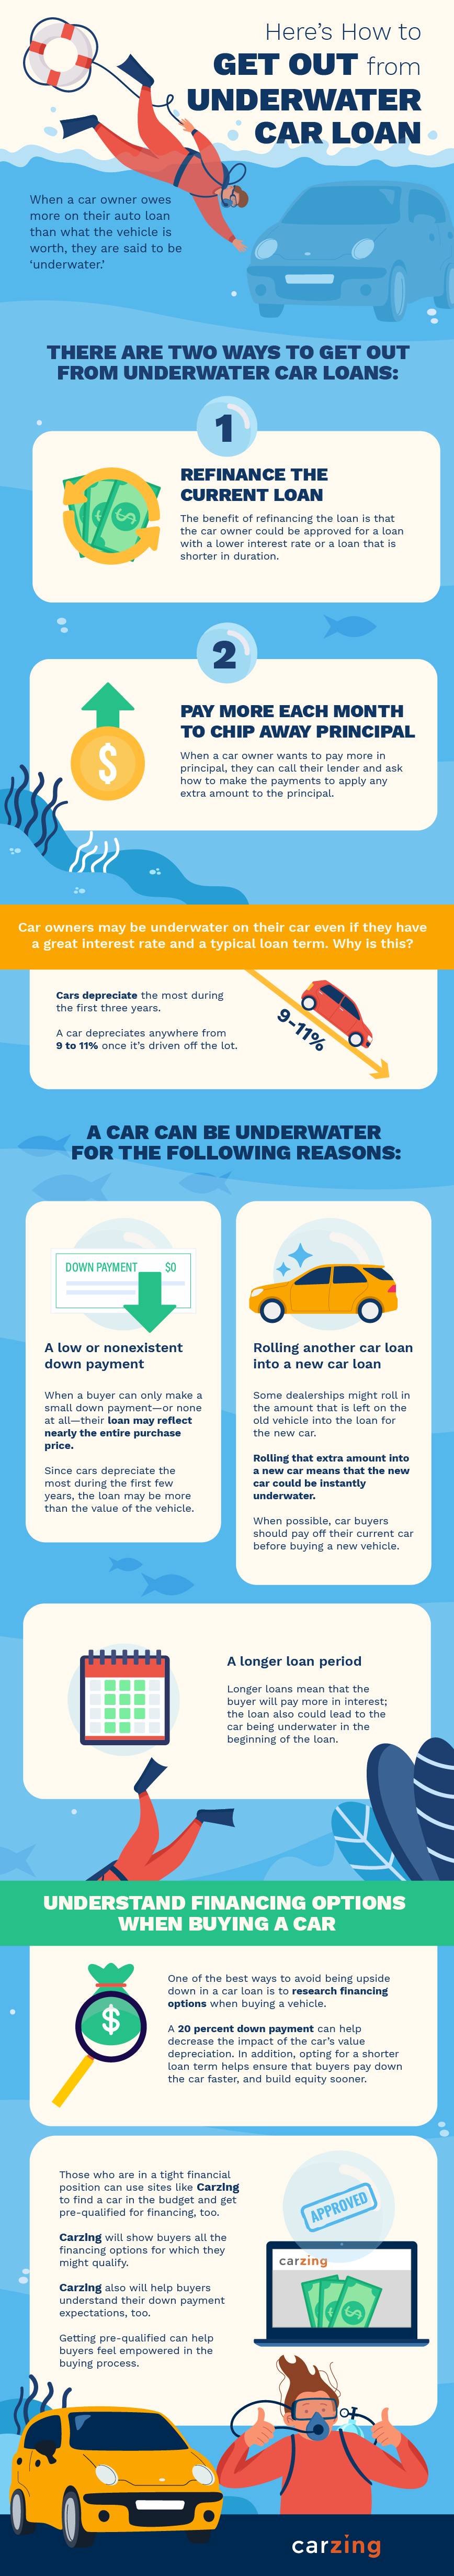 Here’s How to Get Out from Underwater Car Loan